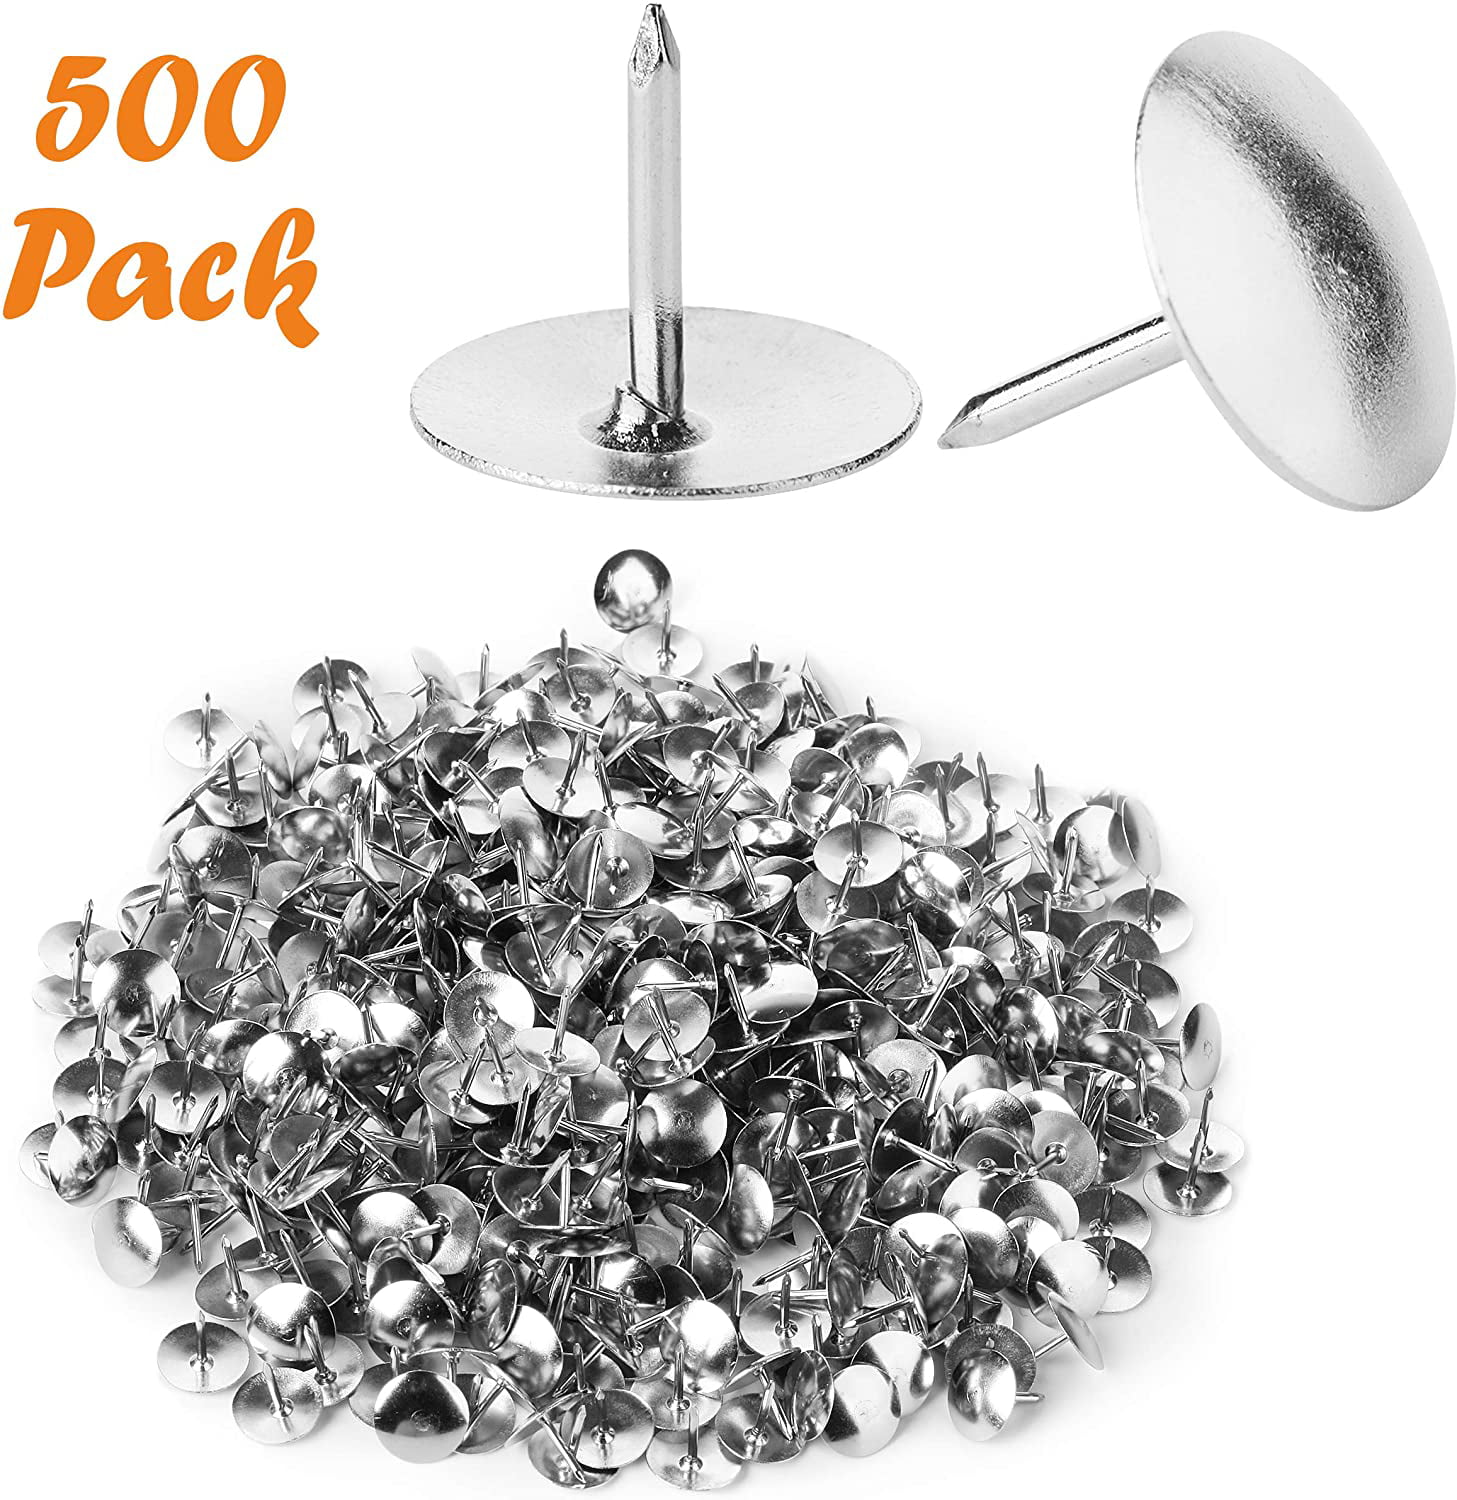 Tack & Pushpins Metallic 3/8 inch Flat Head for Cork Bulletin Board (200/Pack)1-PackNickel-plated (Silver) - 1-Pack - G8 Central